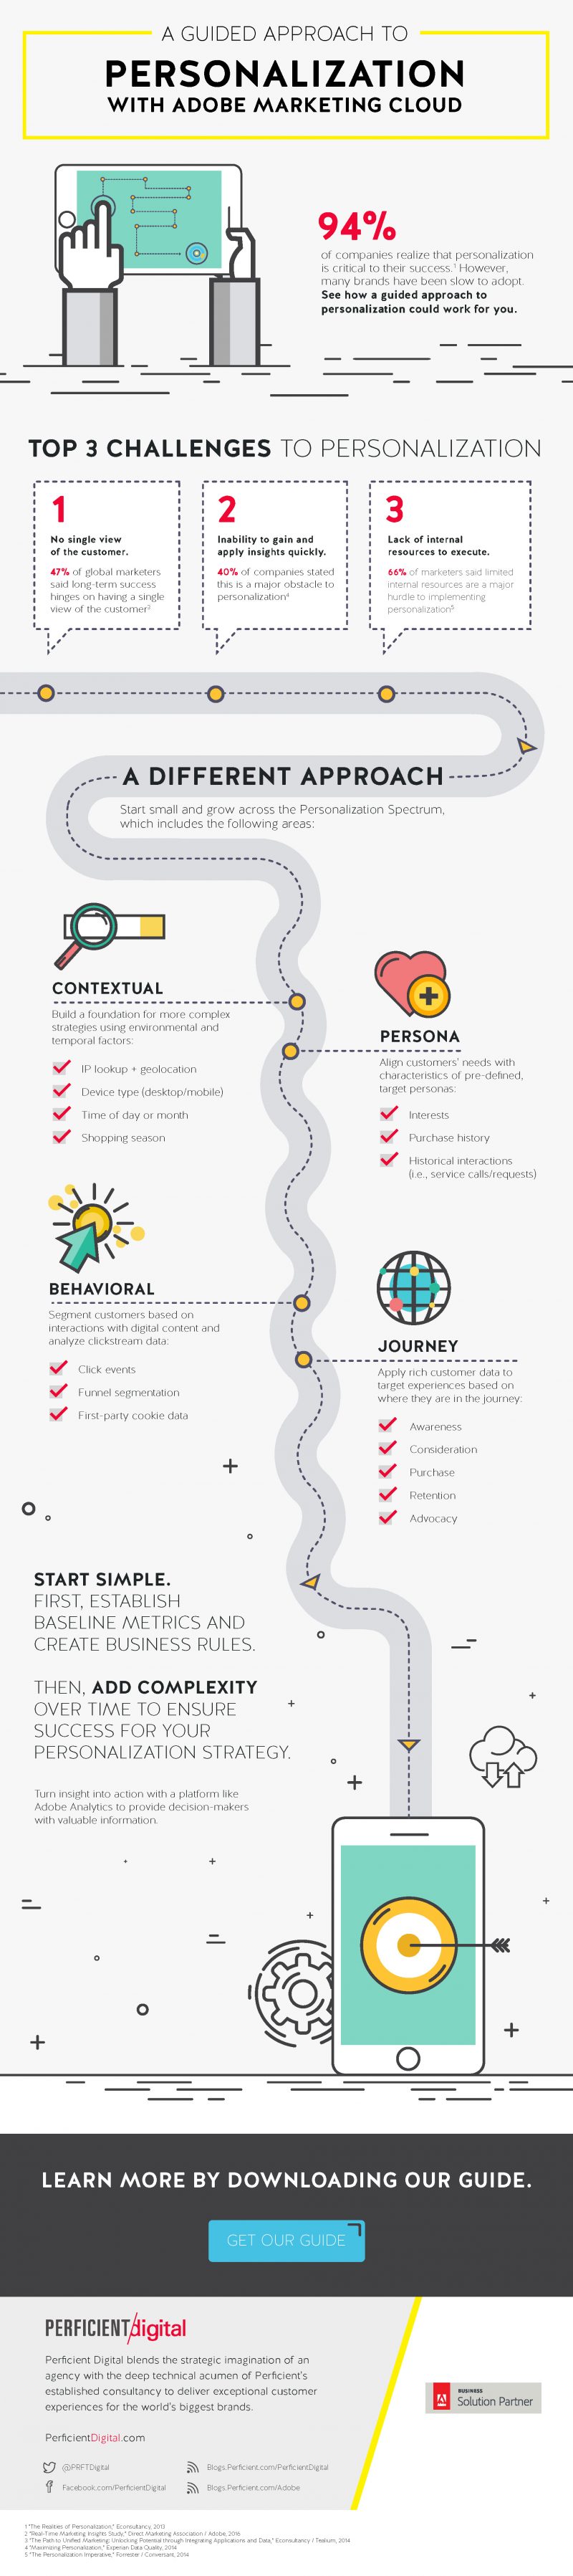 pd_guidedpersonalization_infographic